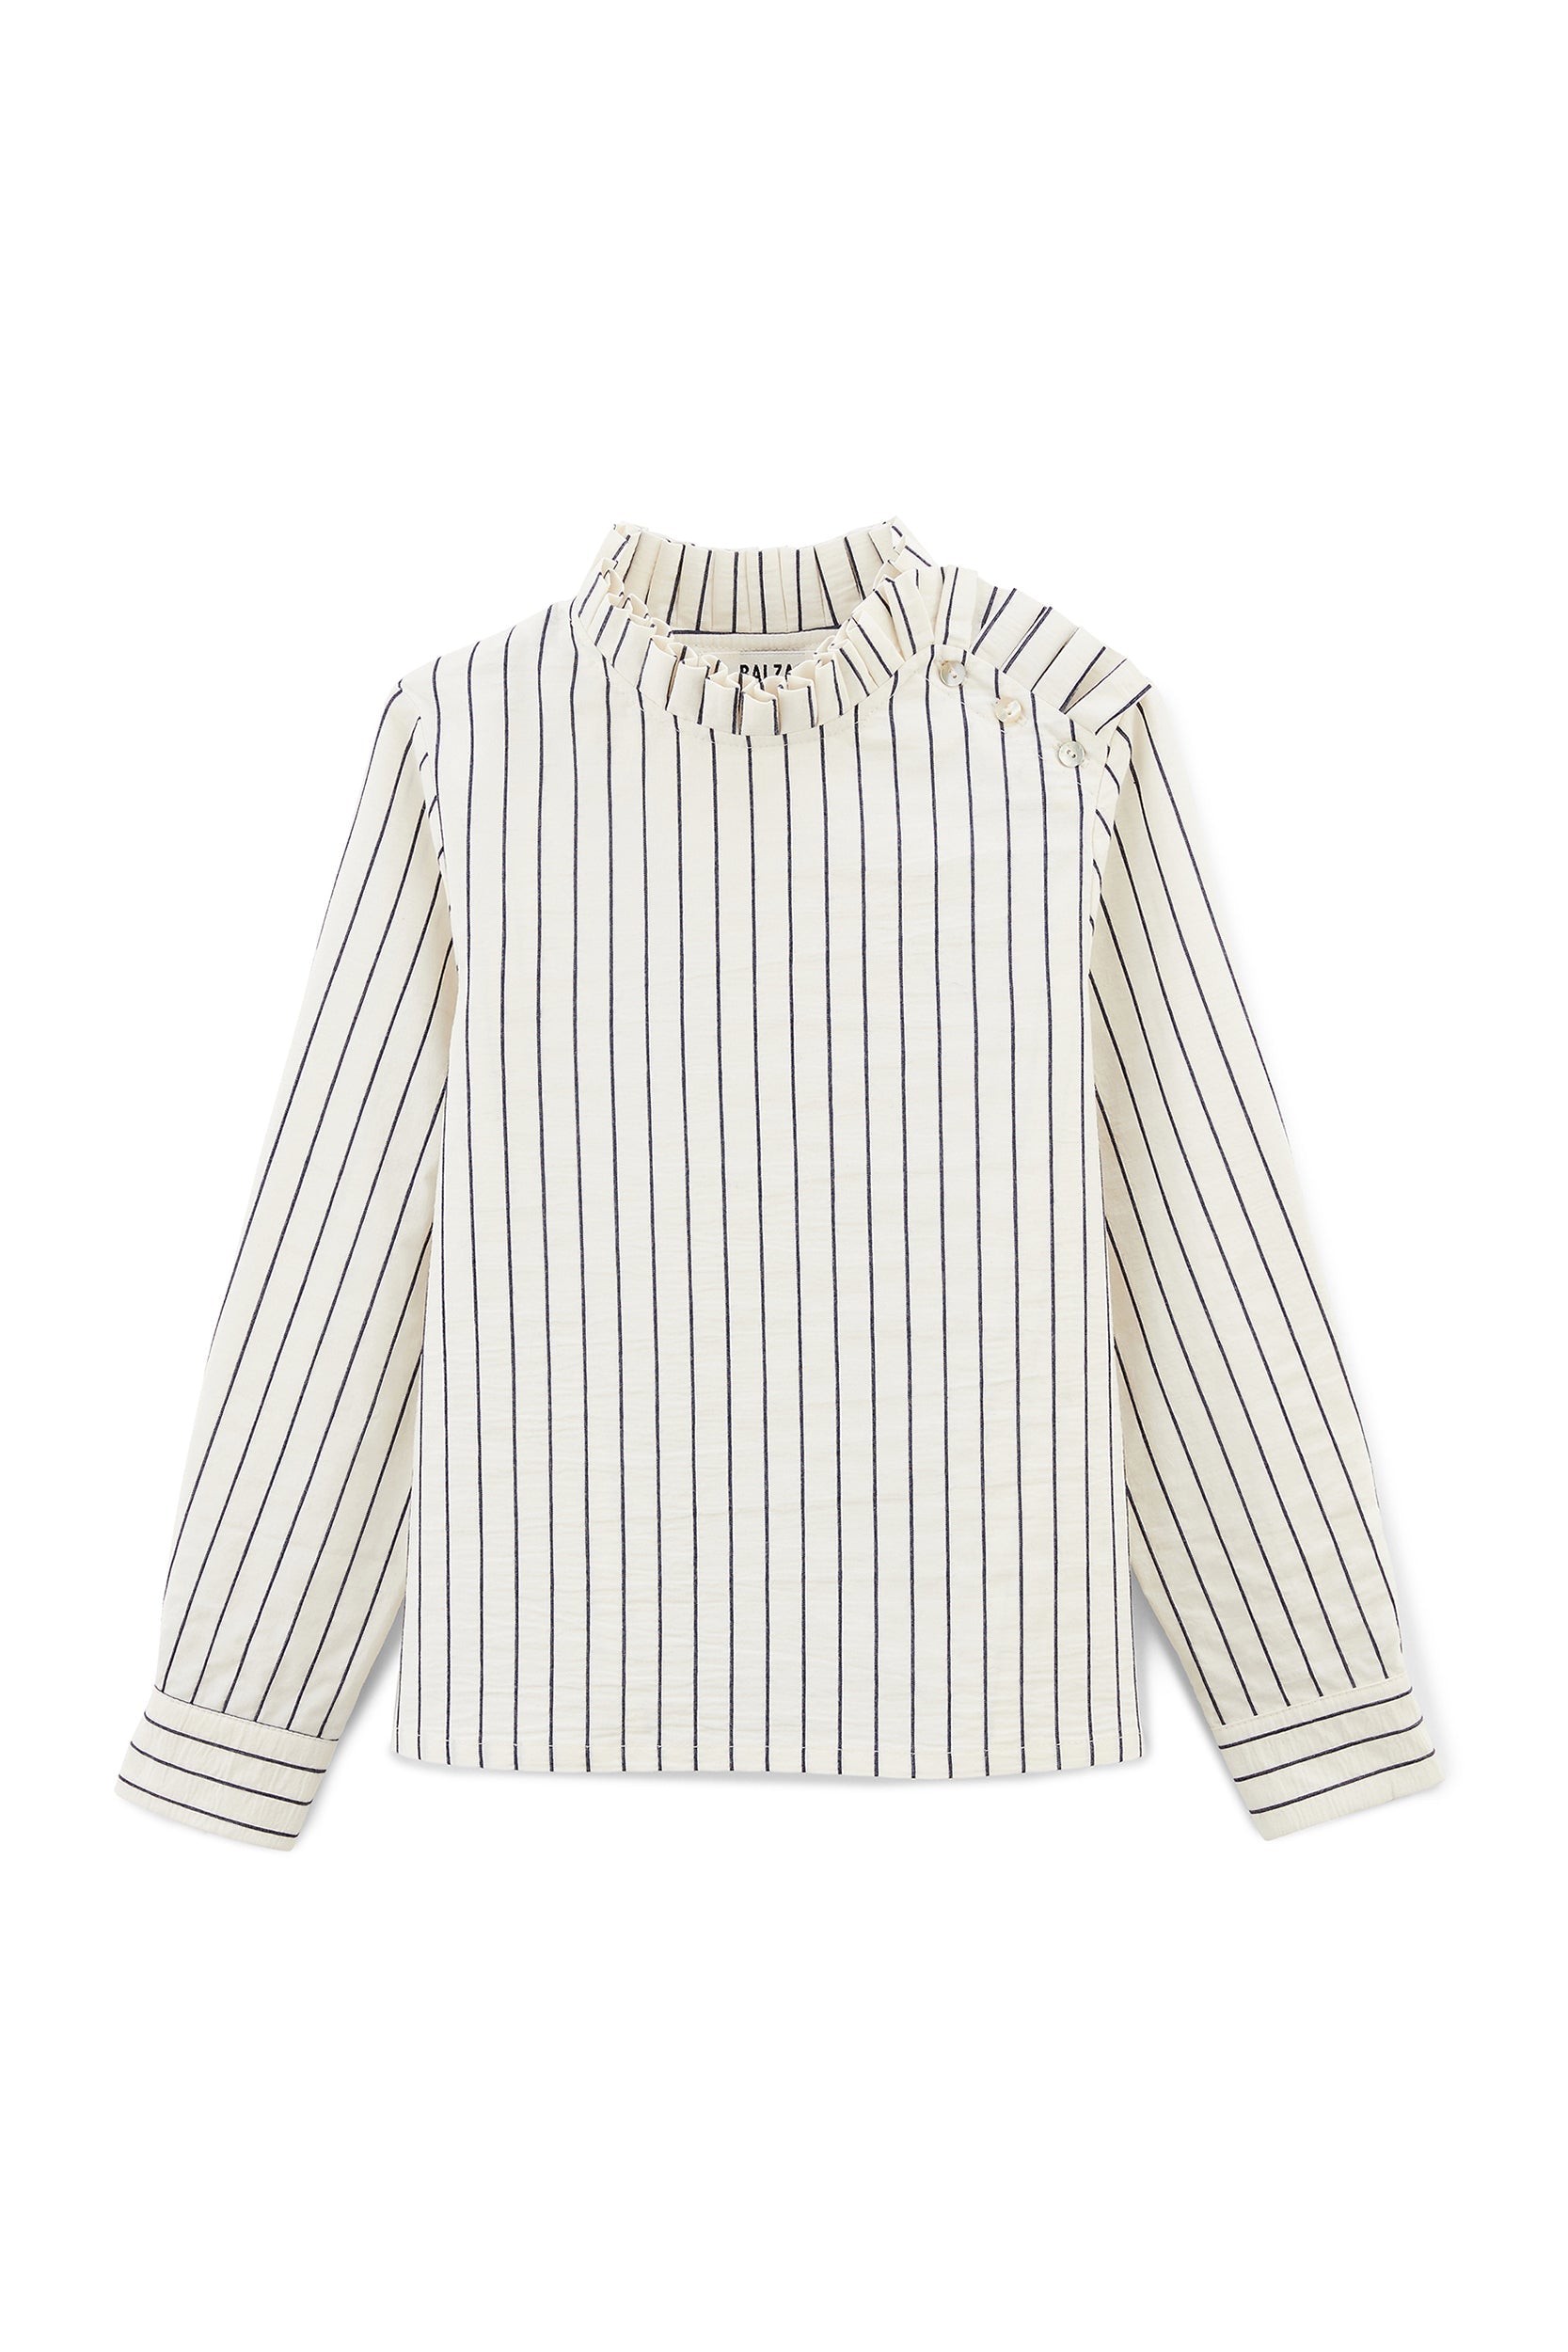 Brussels black and white striped shirt